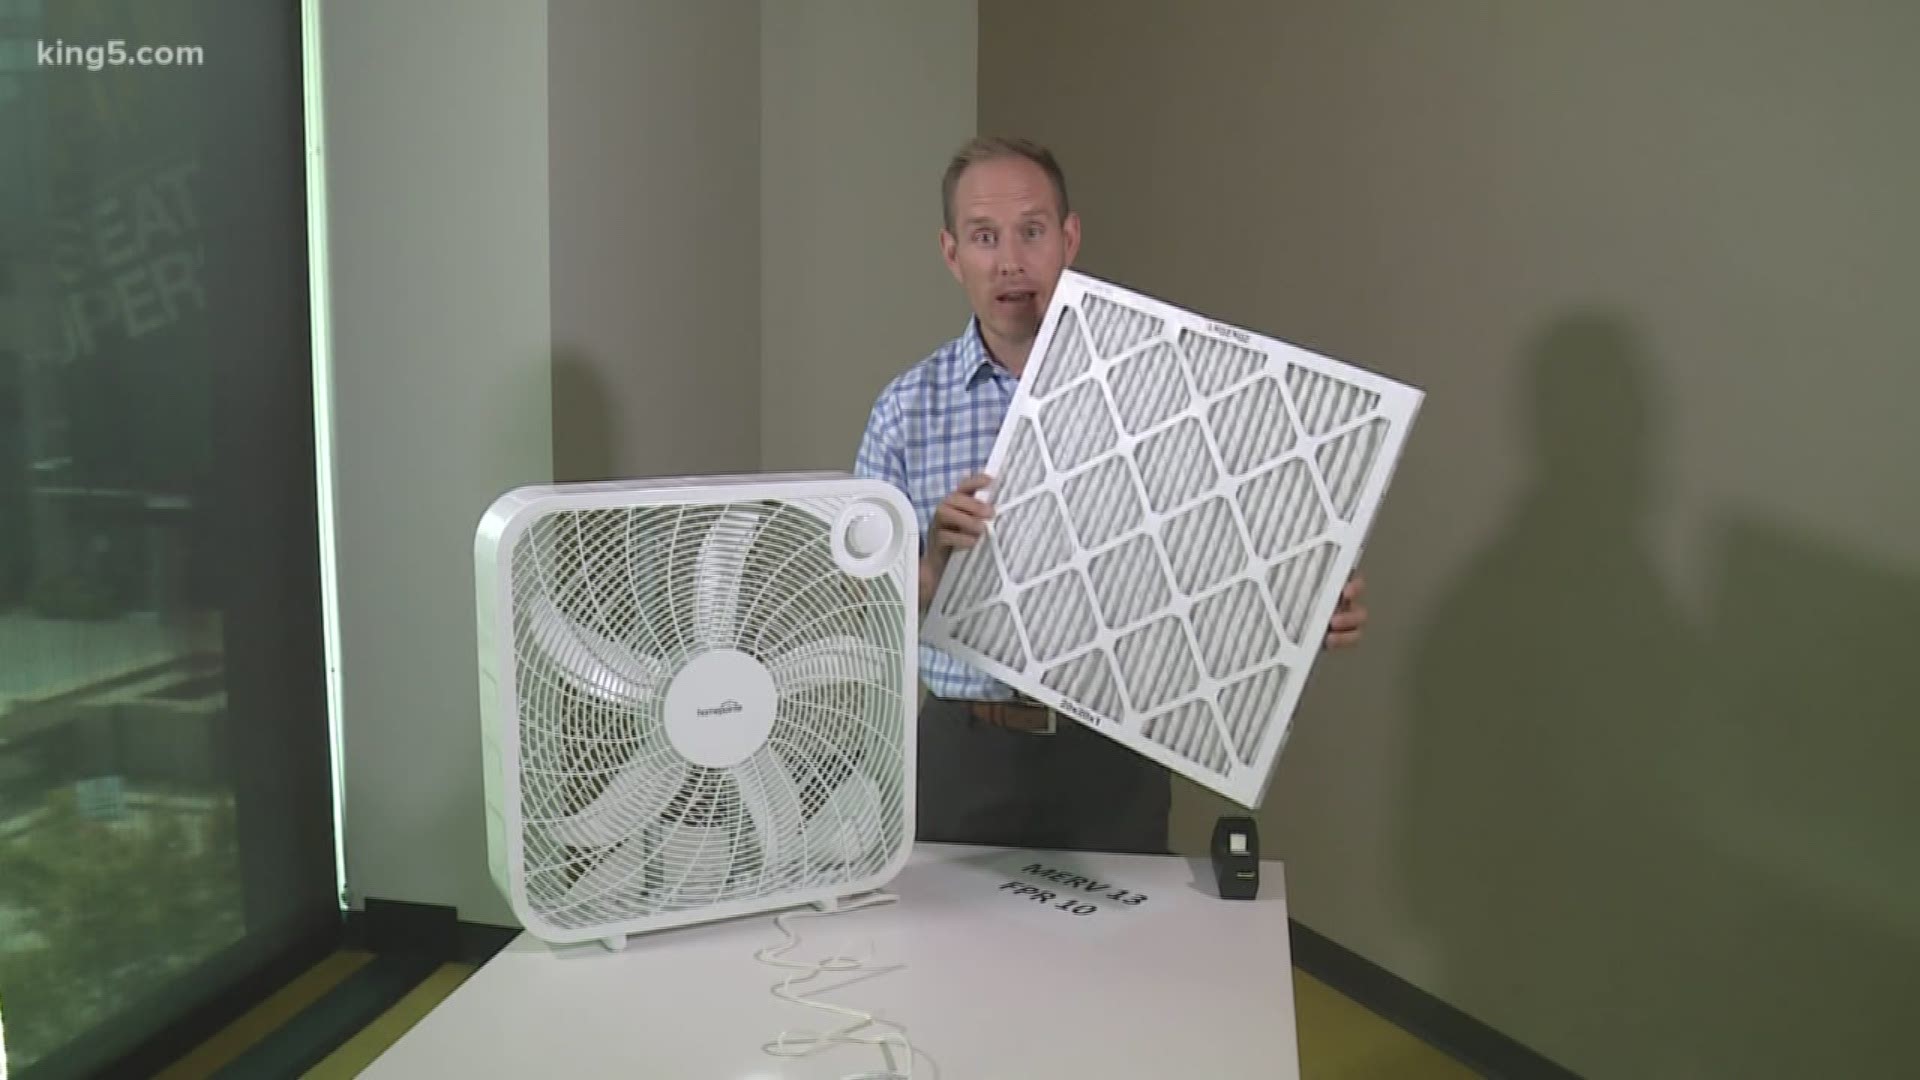 KING 5's Ted Land demonstrates assembling a do-it-yourself air filter.